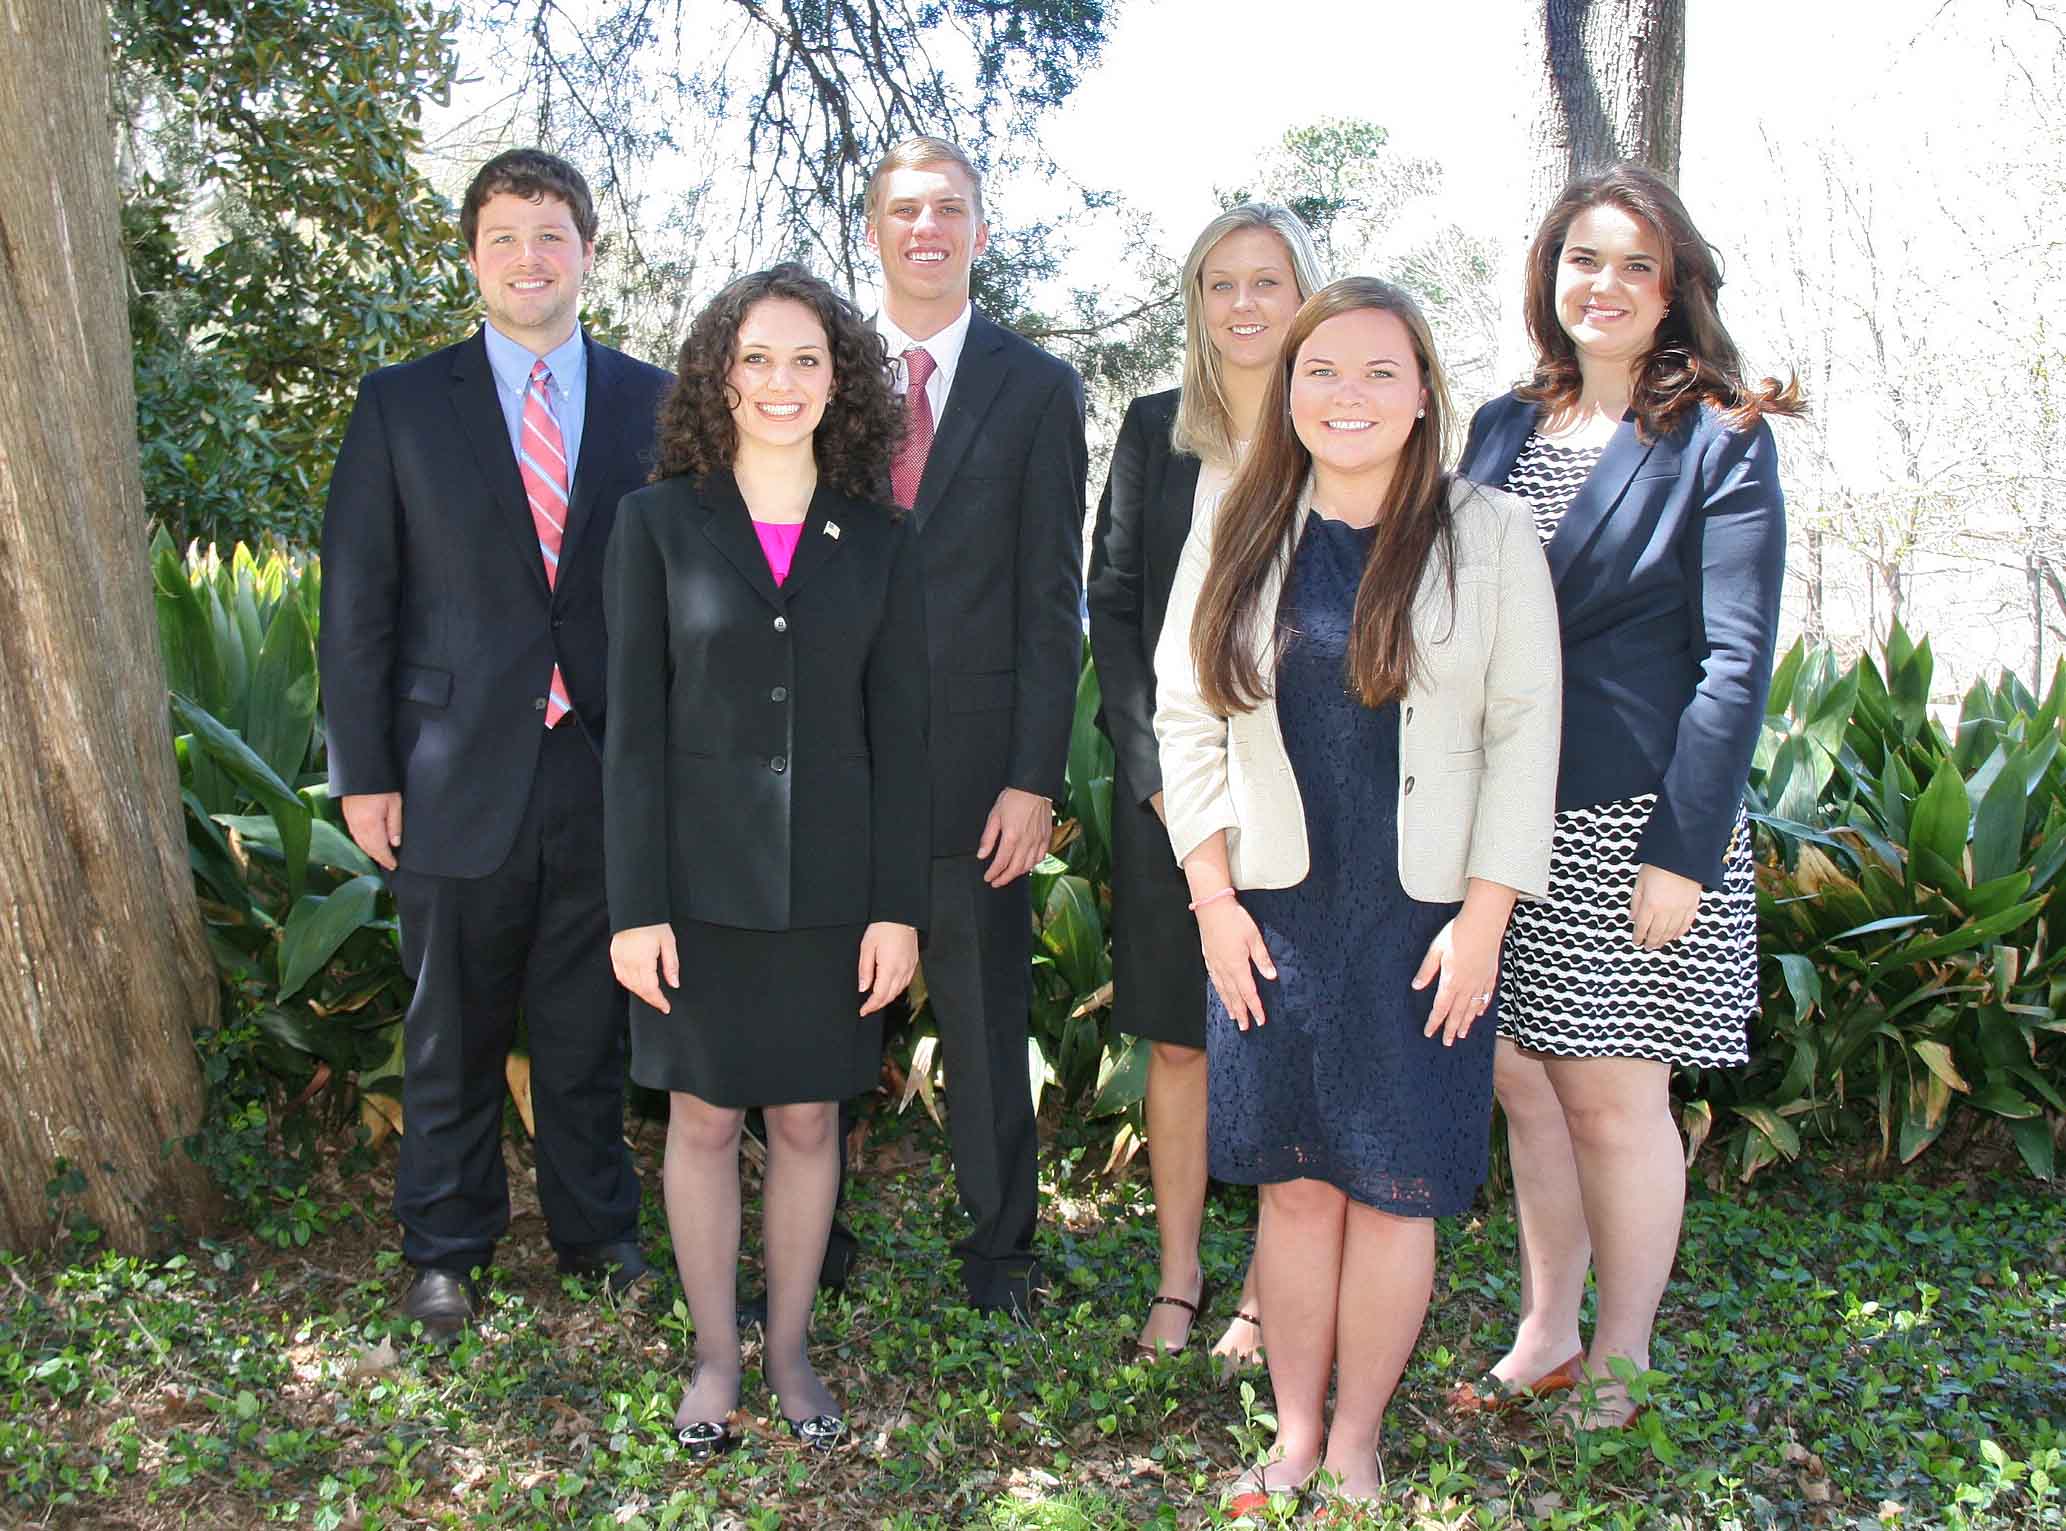 UGA CAES students, from left; back, J. Thomas Golden, Michael Thompson, Sarah Brown, Tess Hammock and, front, Sarah Carnes and Mary Cromley will serve as UGA's Congressional Agriculture Fellows this summer.  Once in Washington D.C., the students will attend agricultural committee hearings and conduct agricultural-related research, all while earning credit hours towards graduation.